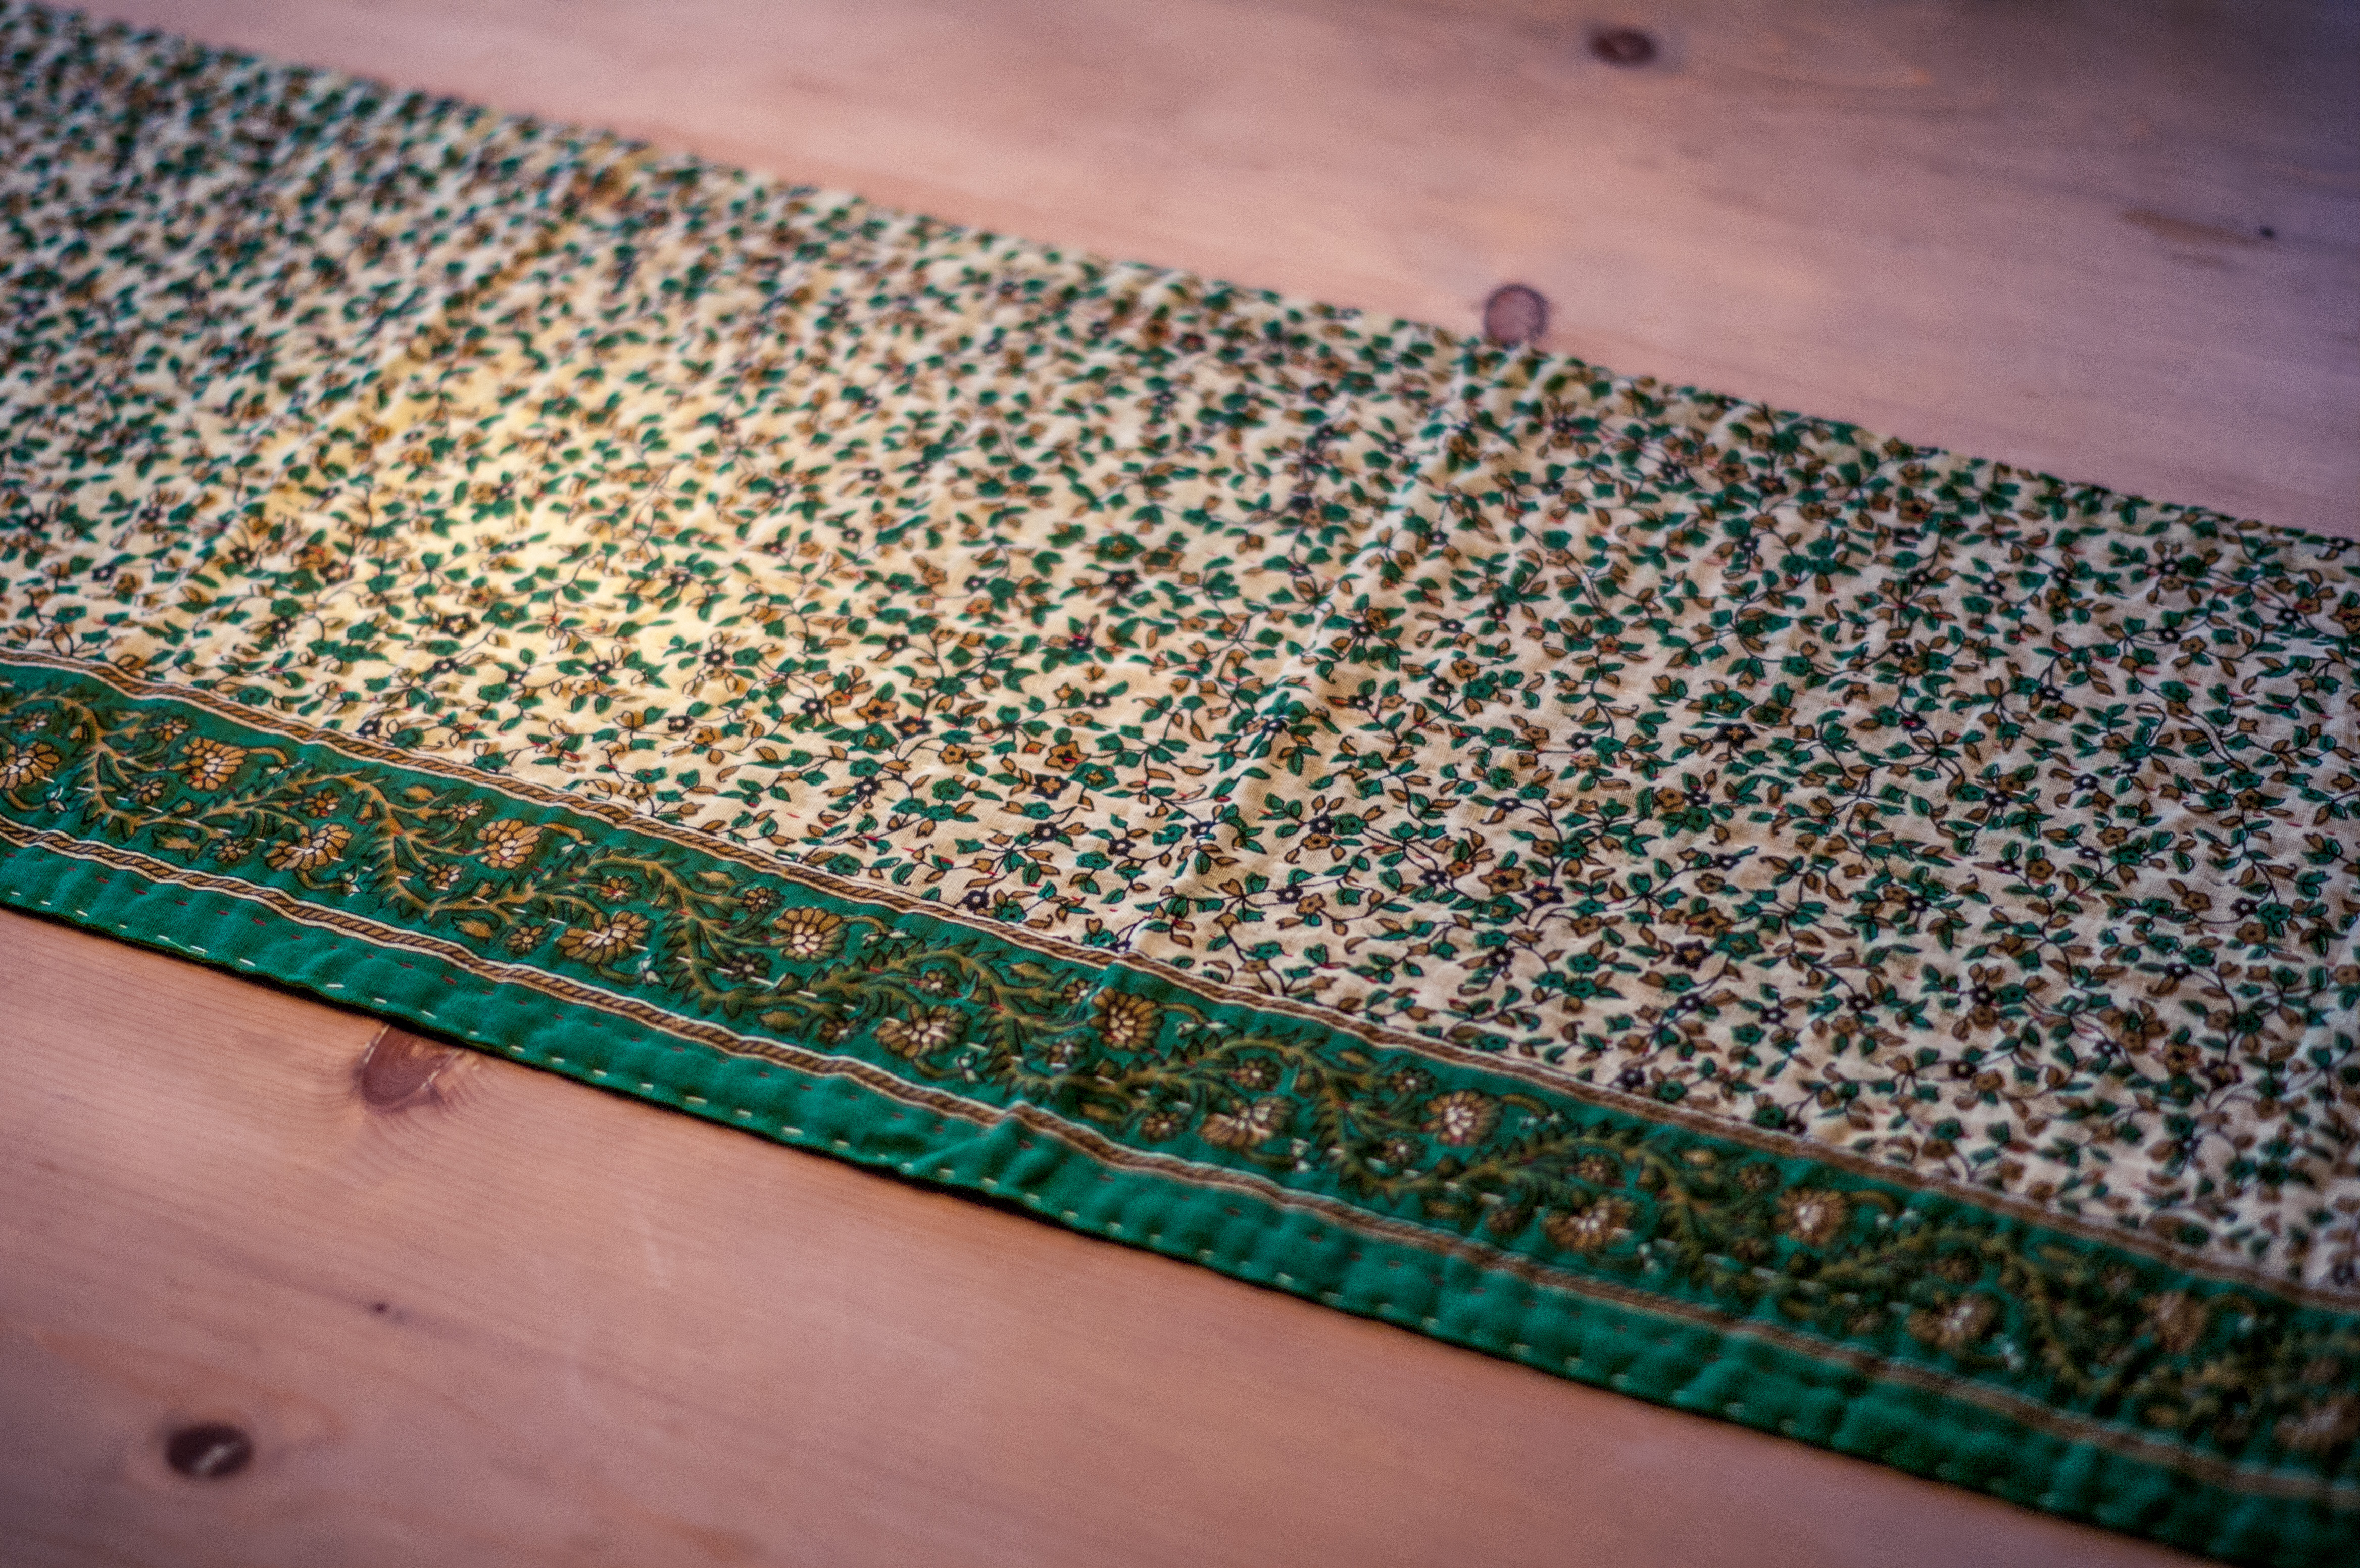 A beautiful kantha sewn vintage cotton table runner